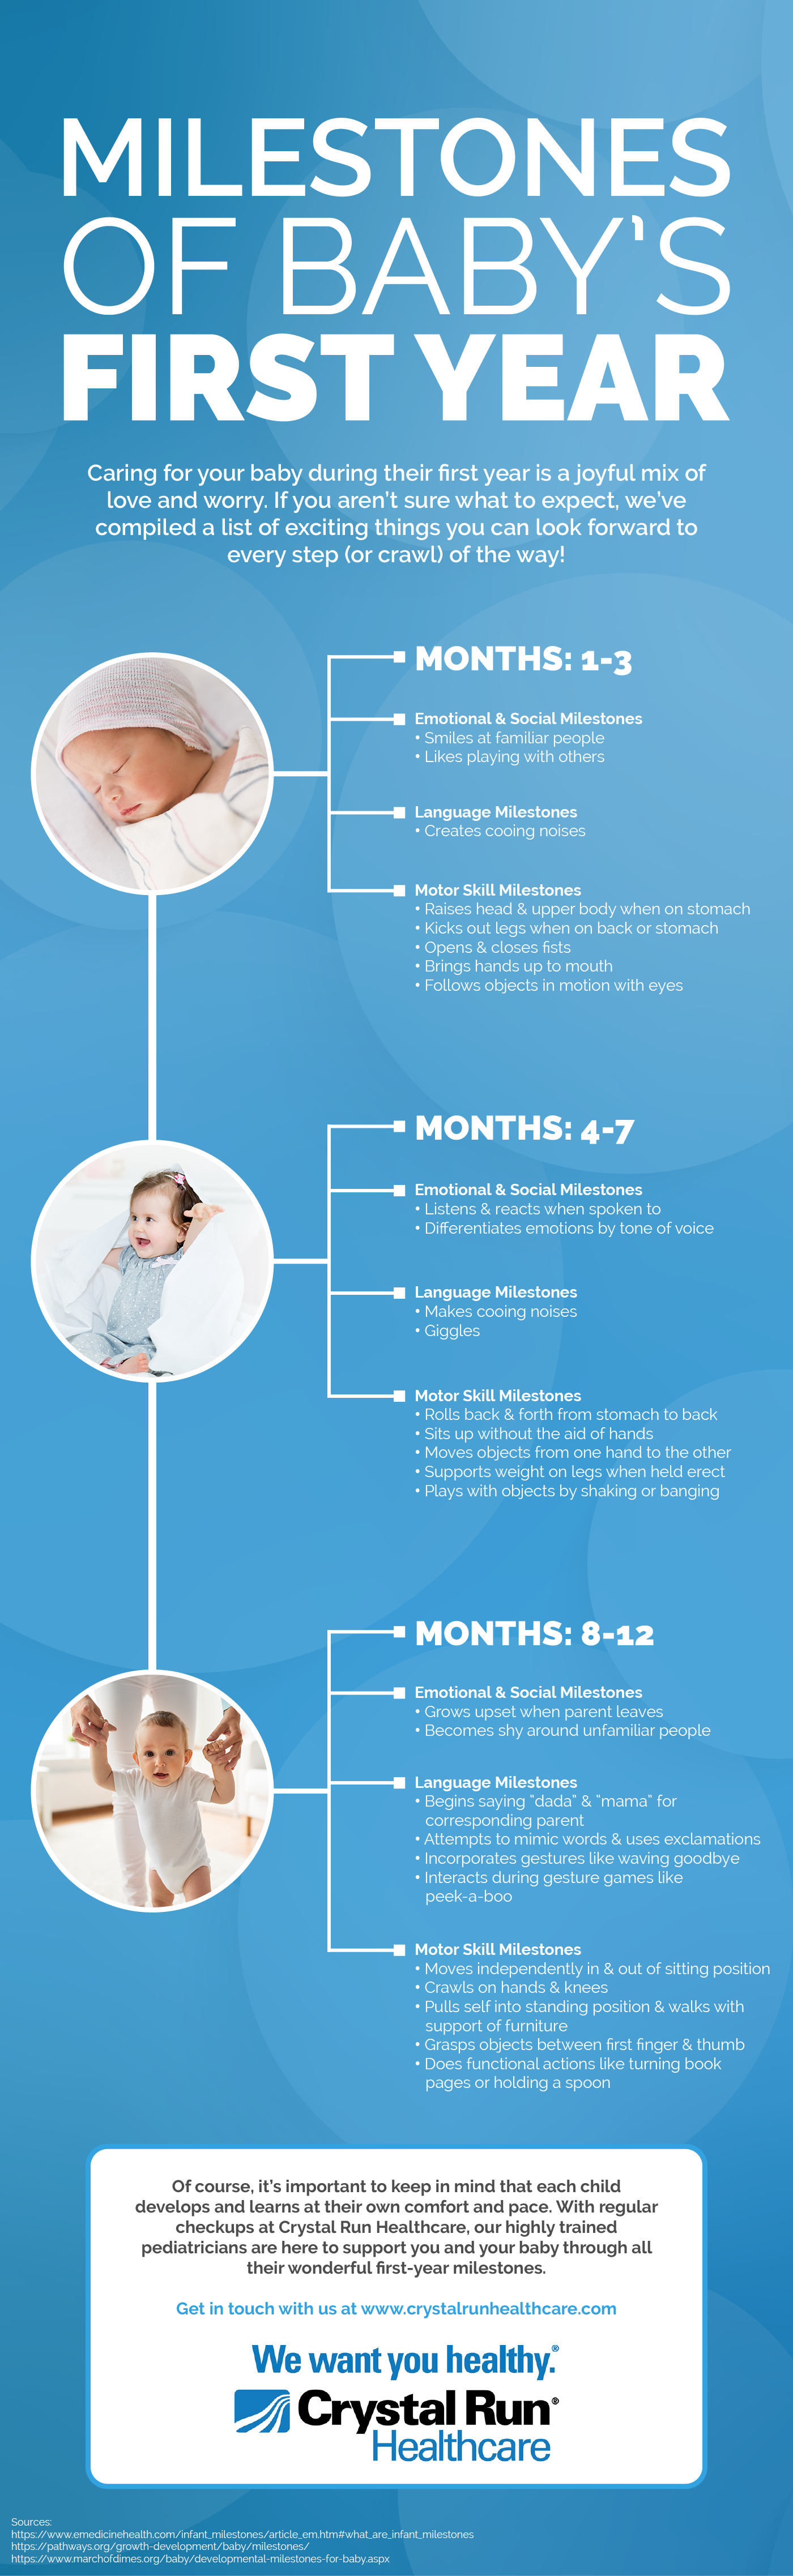 Milestones of Baby's First Year Infographic